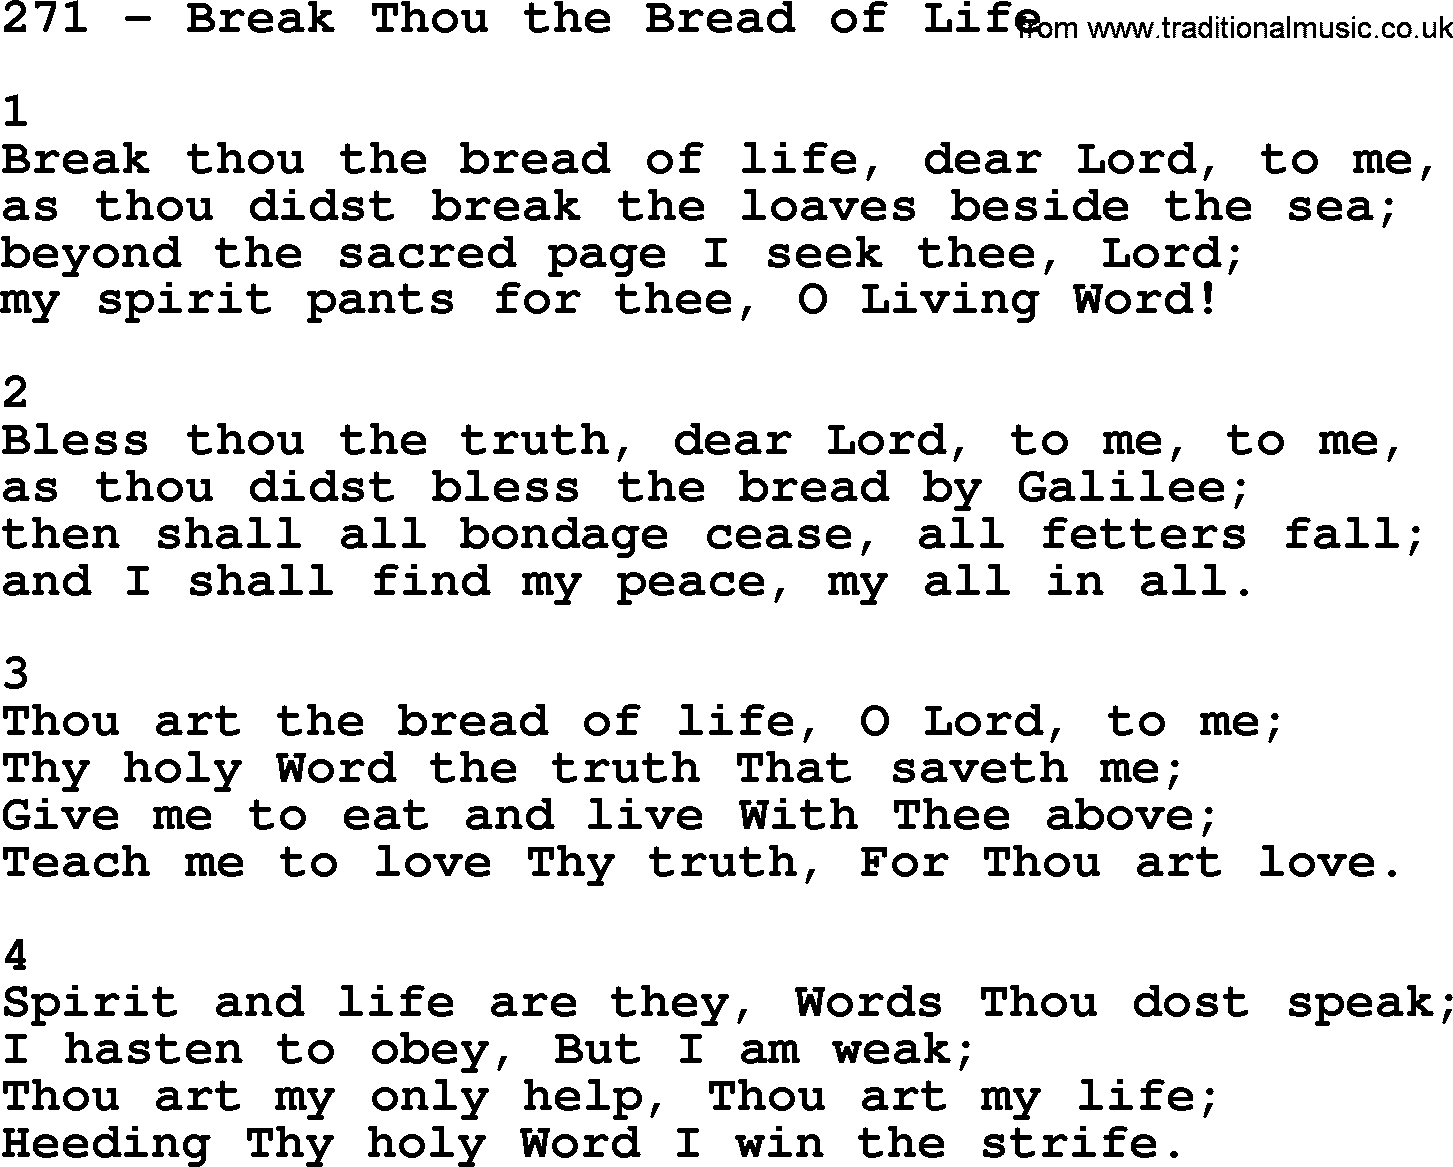 Complete Adventis Hymnal, title: 271-Break Thou The Bread Of Life, with lyrics, midi, mp3, powerpoints(PPT) and PDF,